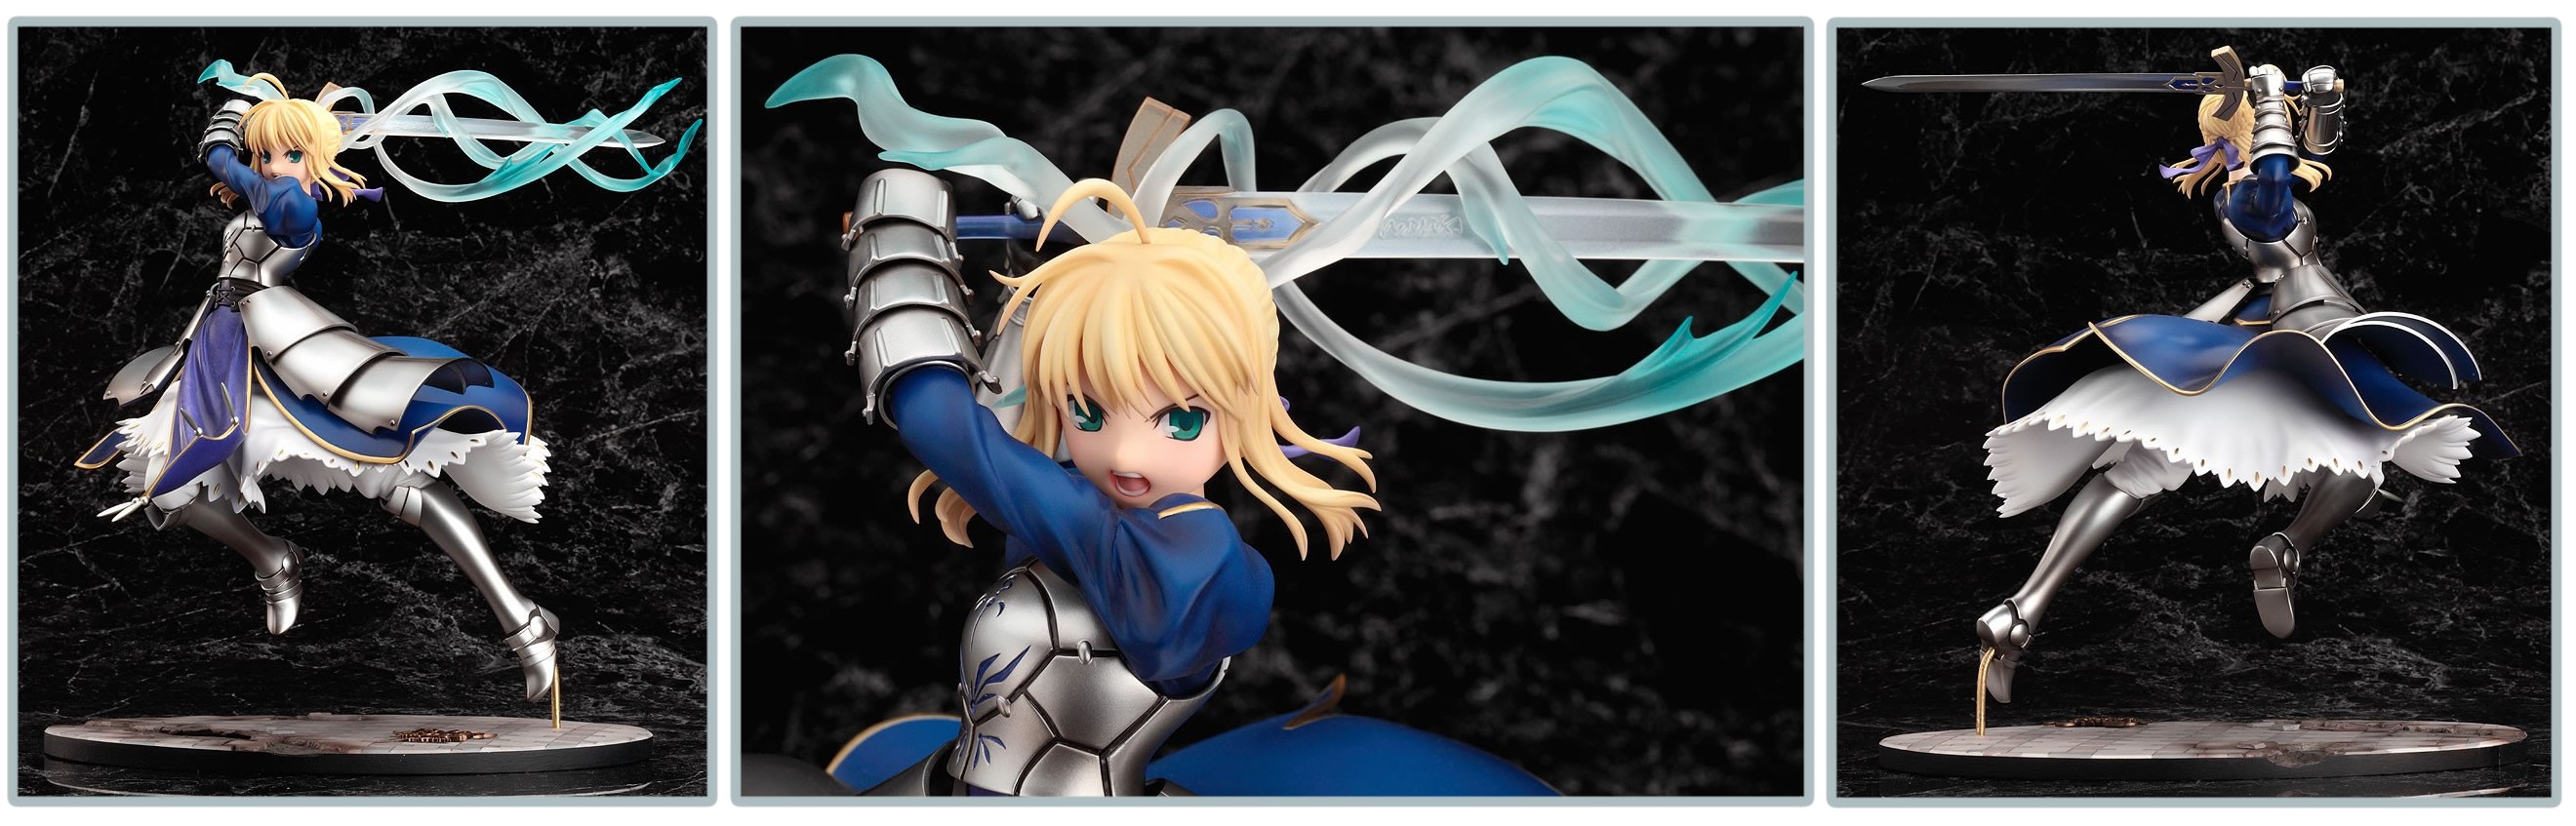 Good Smile Company – Fate Stay Night Saber 1 7, Triumphant Excalibur